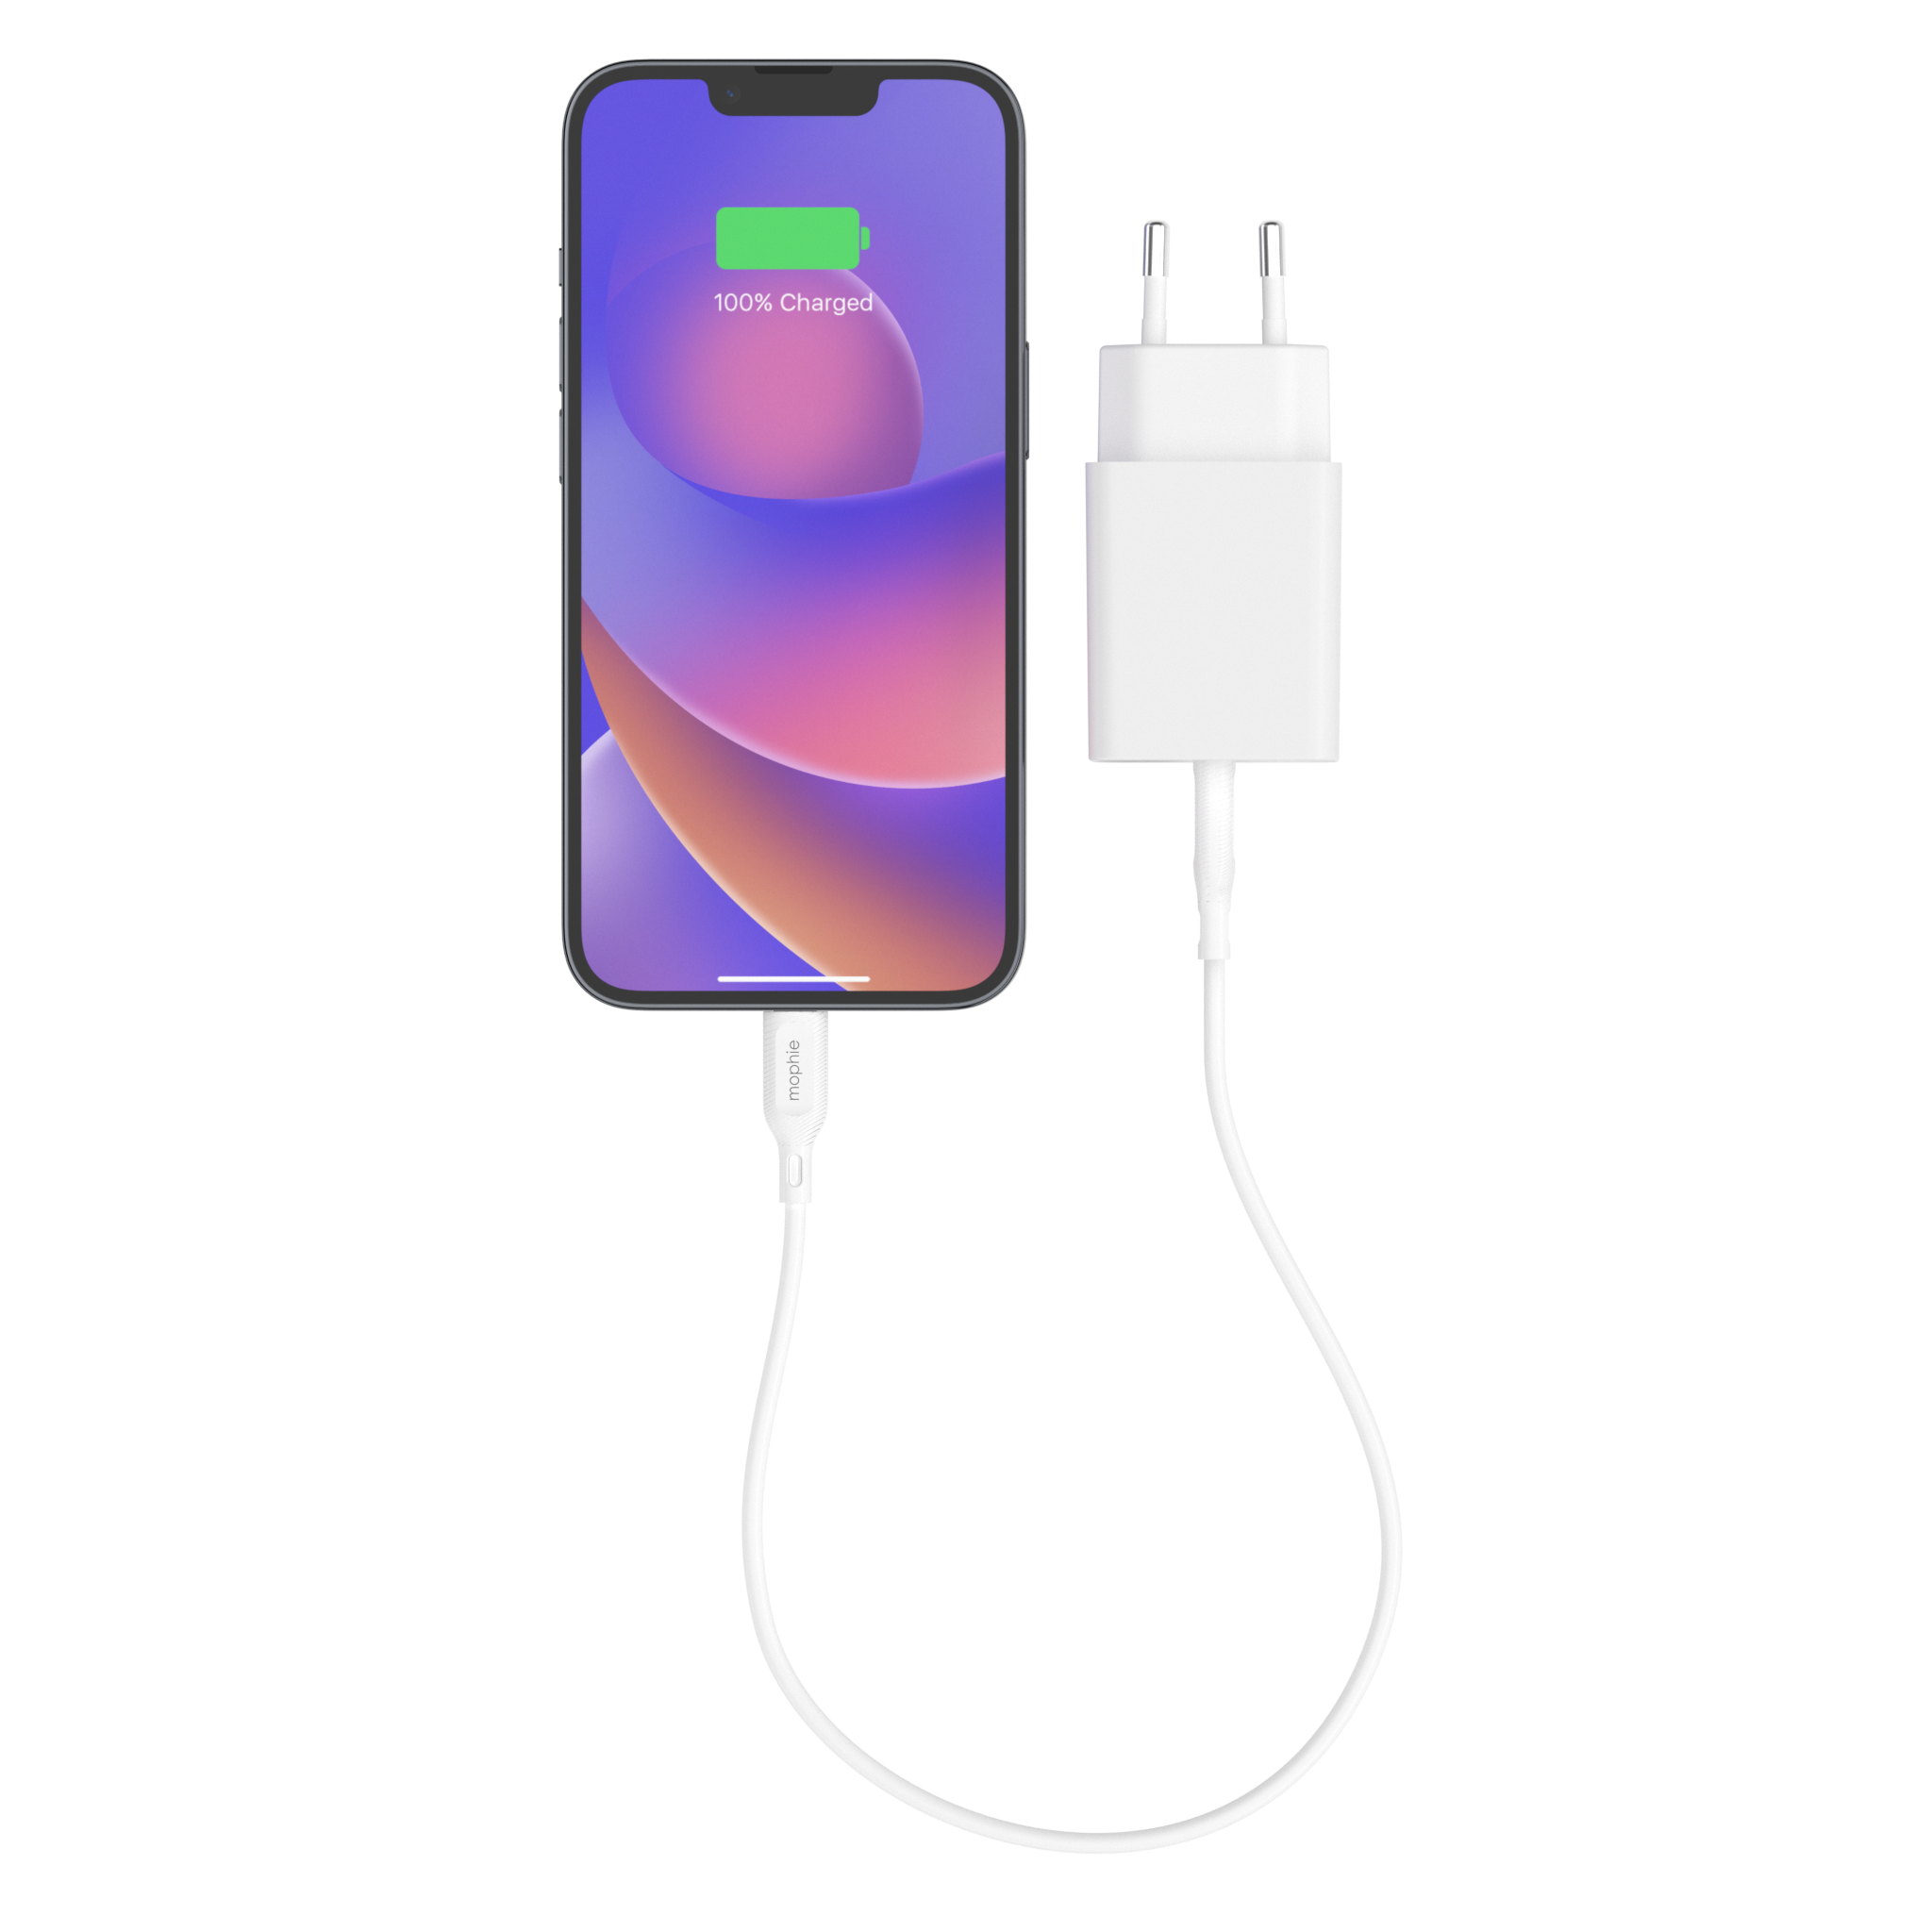 Up to 20W PD Speeds
||Charge your phone at the fastest speed possible with the USB-C’s 20W output and get up to 50% battery in just 30 minutes.